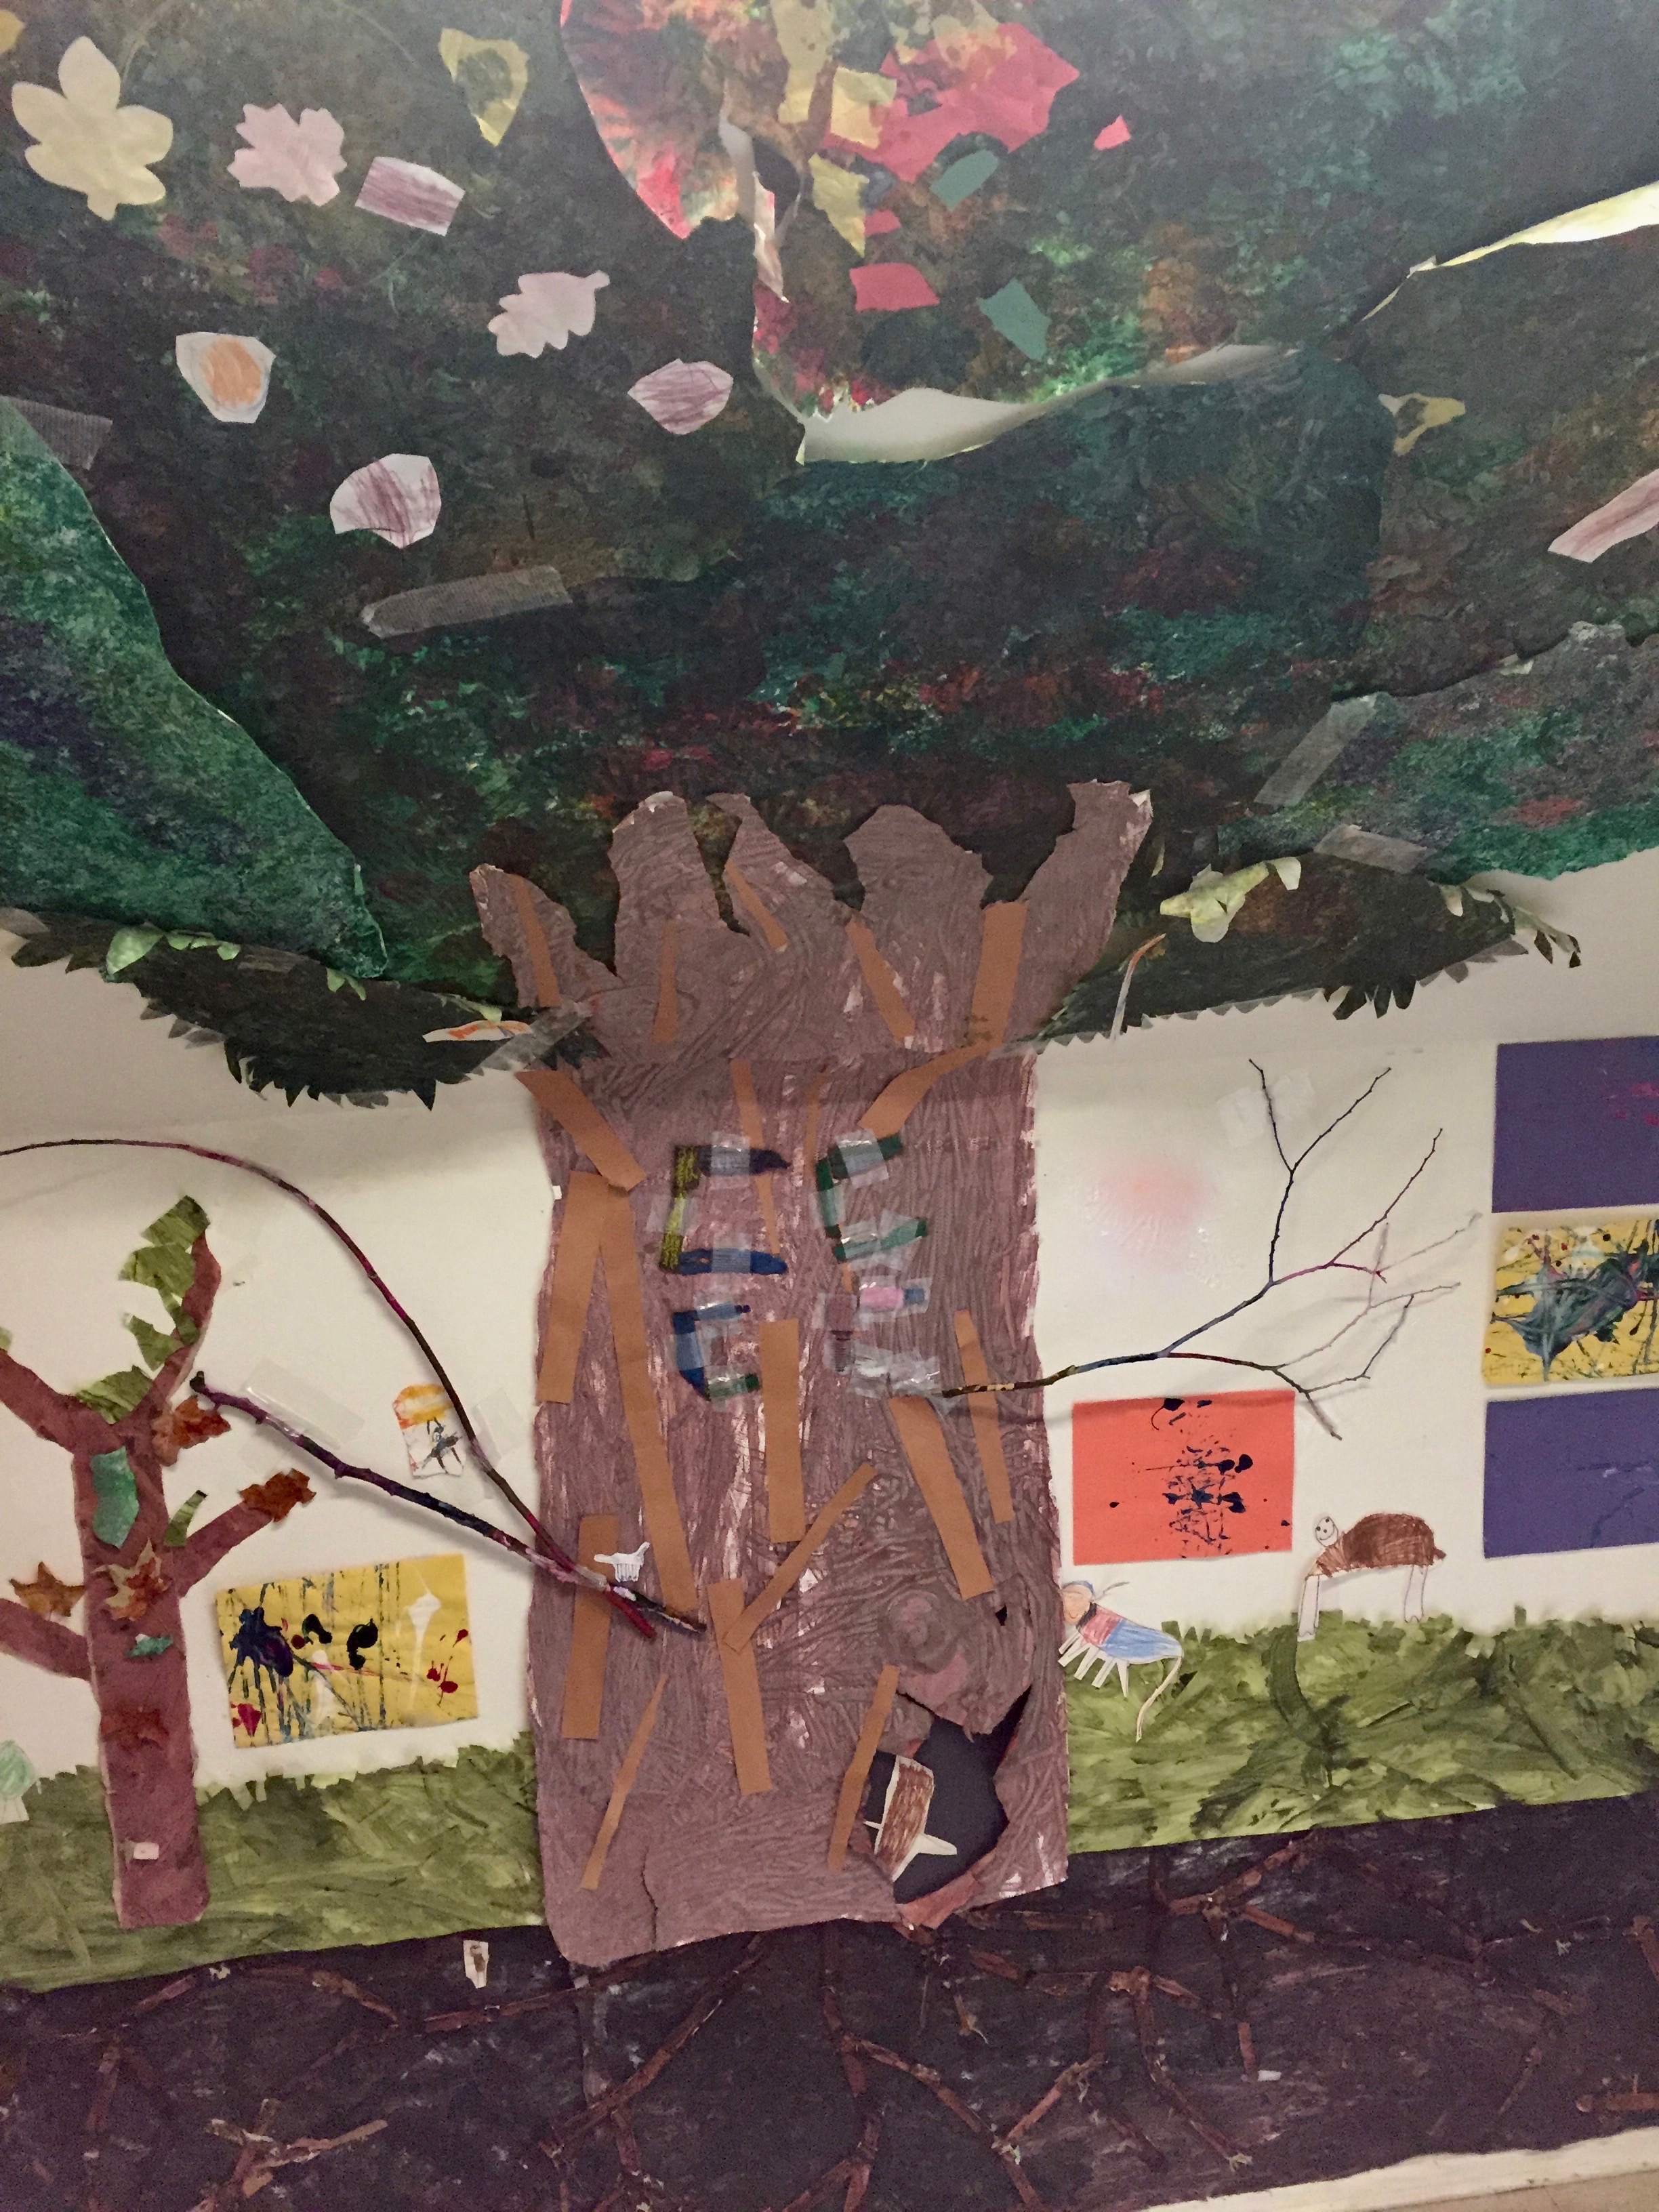 Preschool children's paintings creating a model of a forest as they understand it.